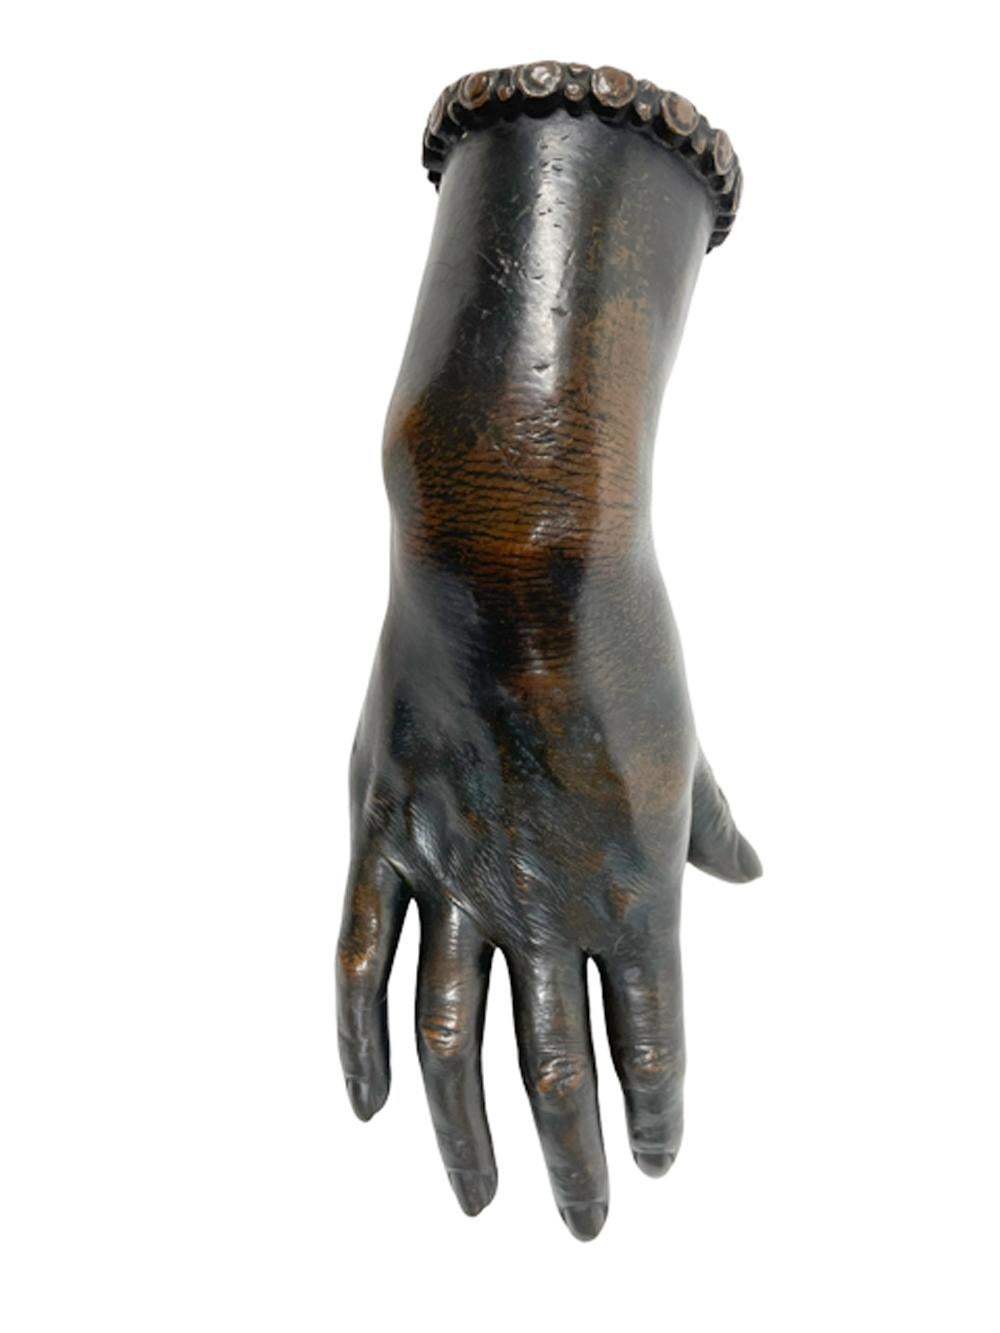 Art Deco Life-Size Patinated Cast Bronze Model of a Female Hand Dated 1926 For Sale 2